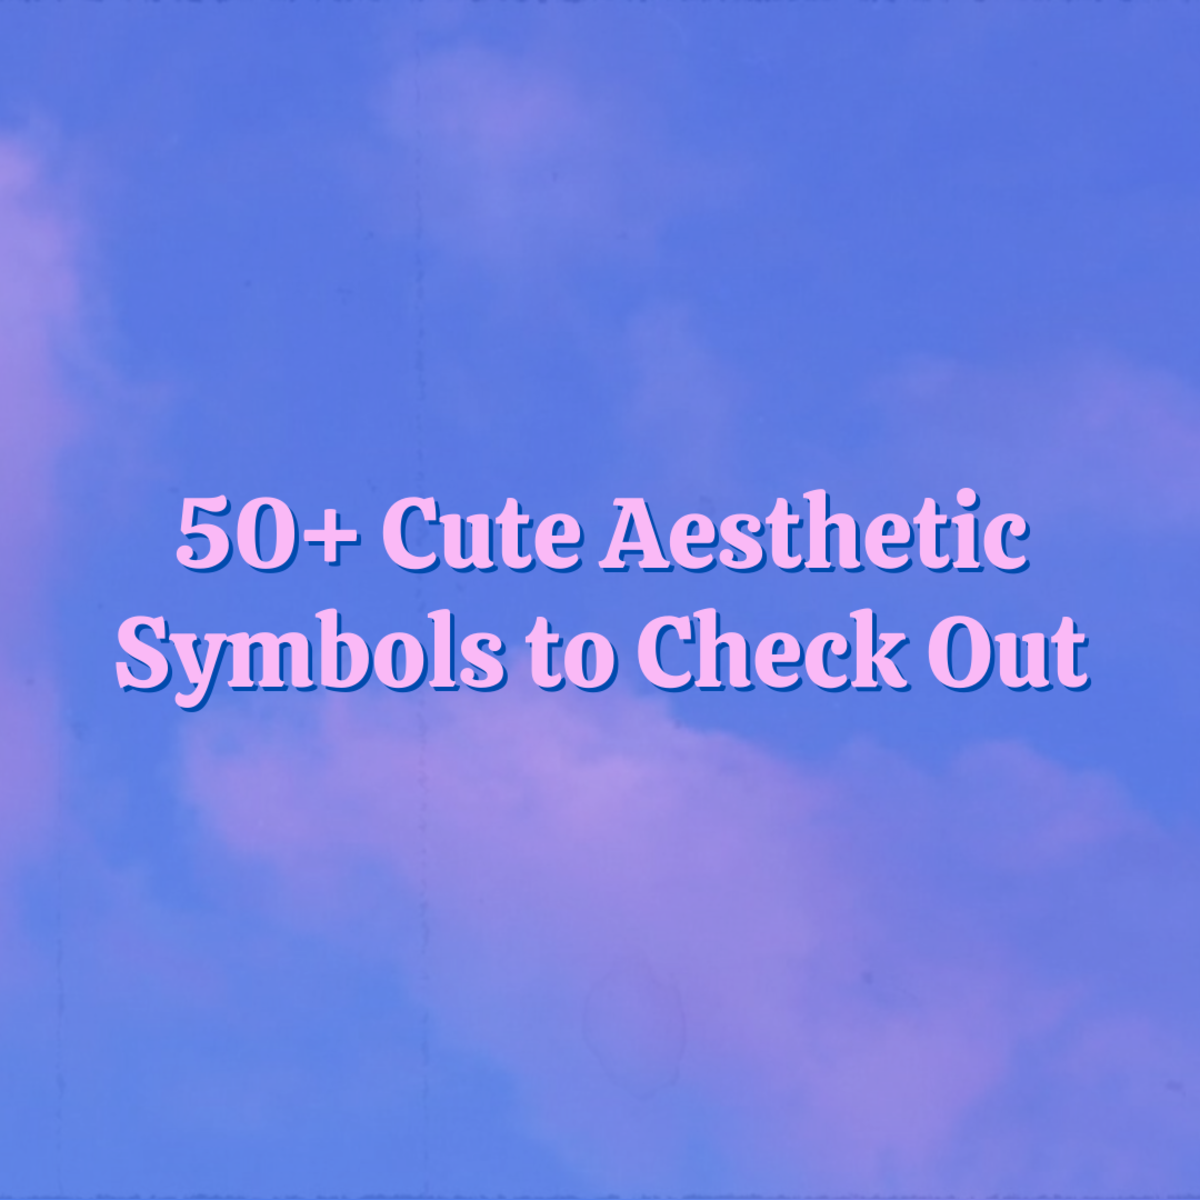 Discover a variety of super cute aesthetic symbols in this in-depth guide!